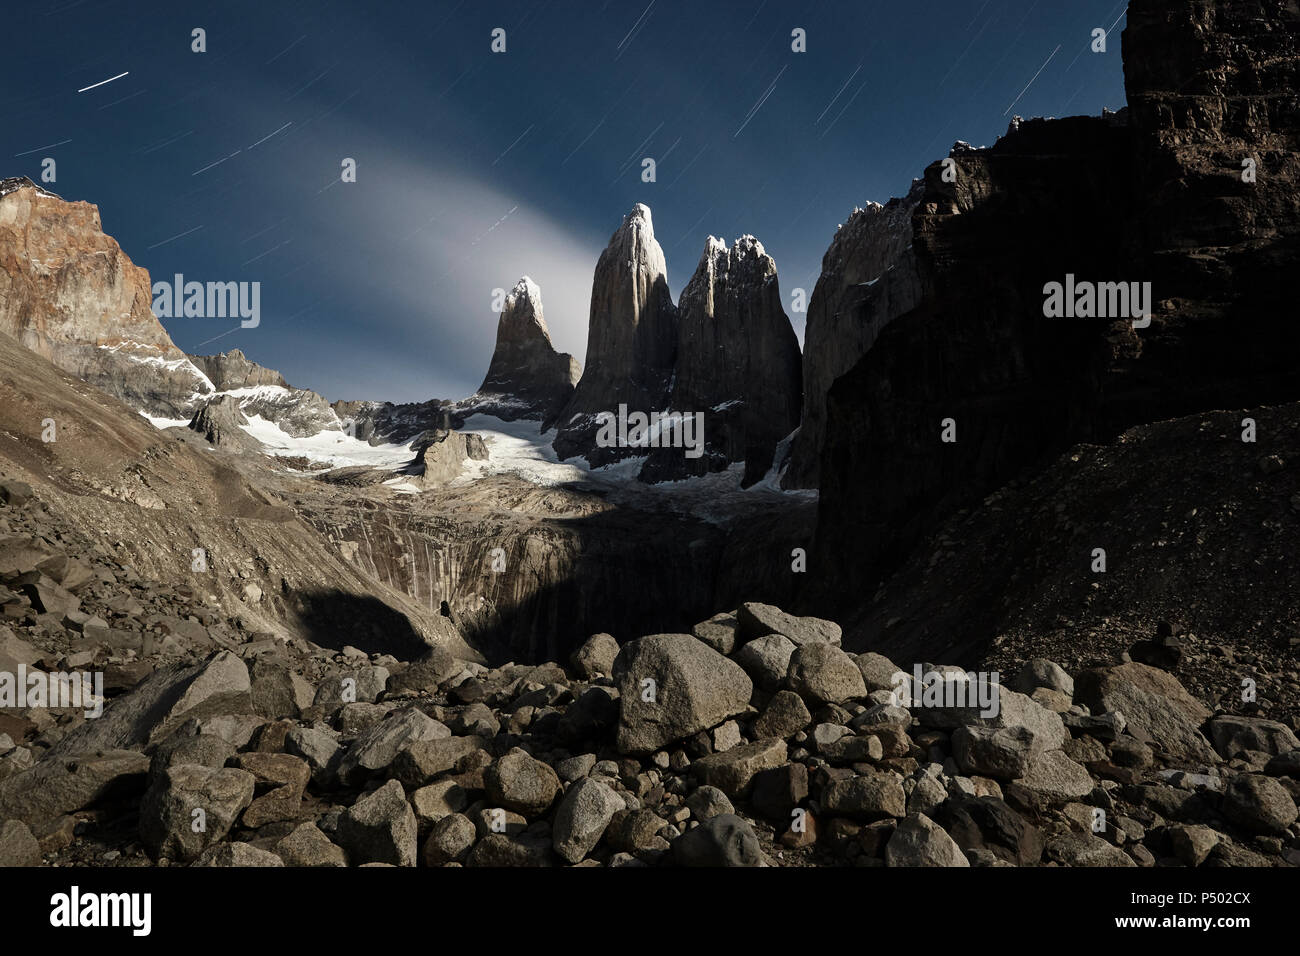 Chile, Patagonie, Nationalpark Torres del Paine at night Stock Photo